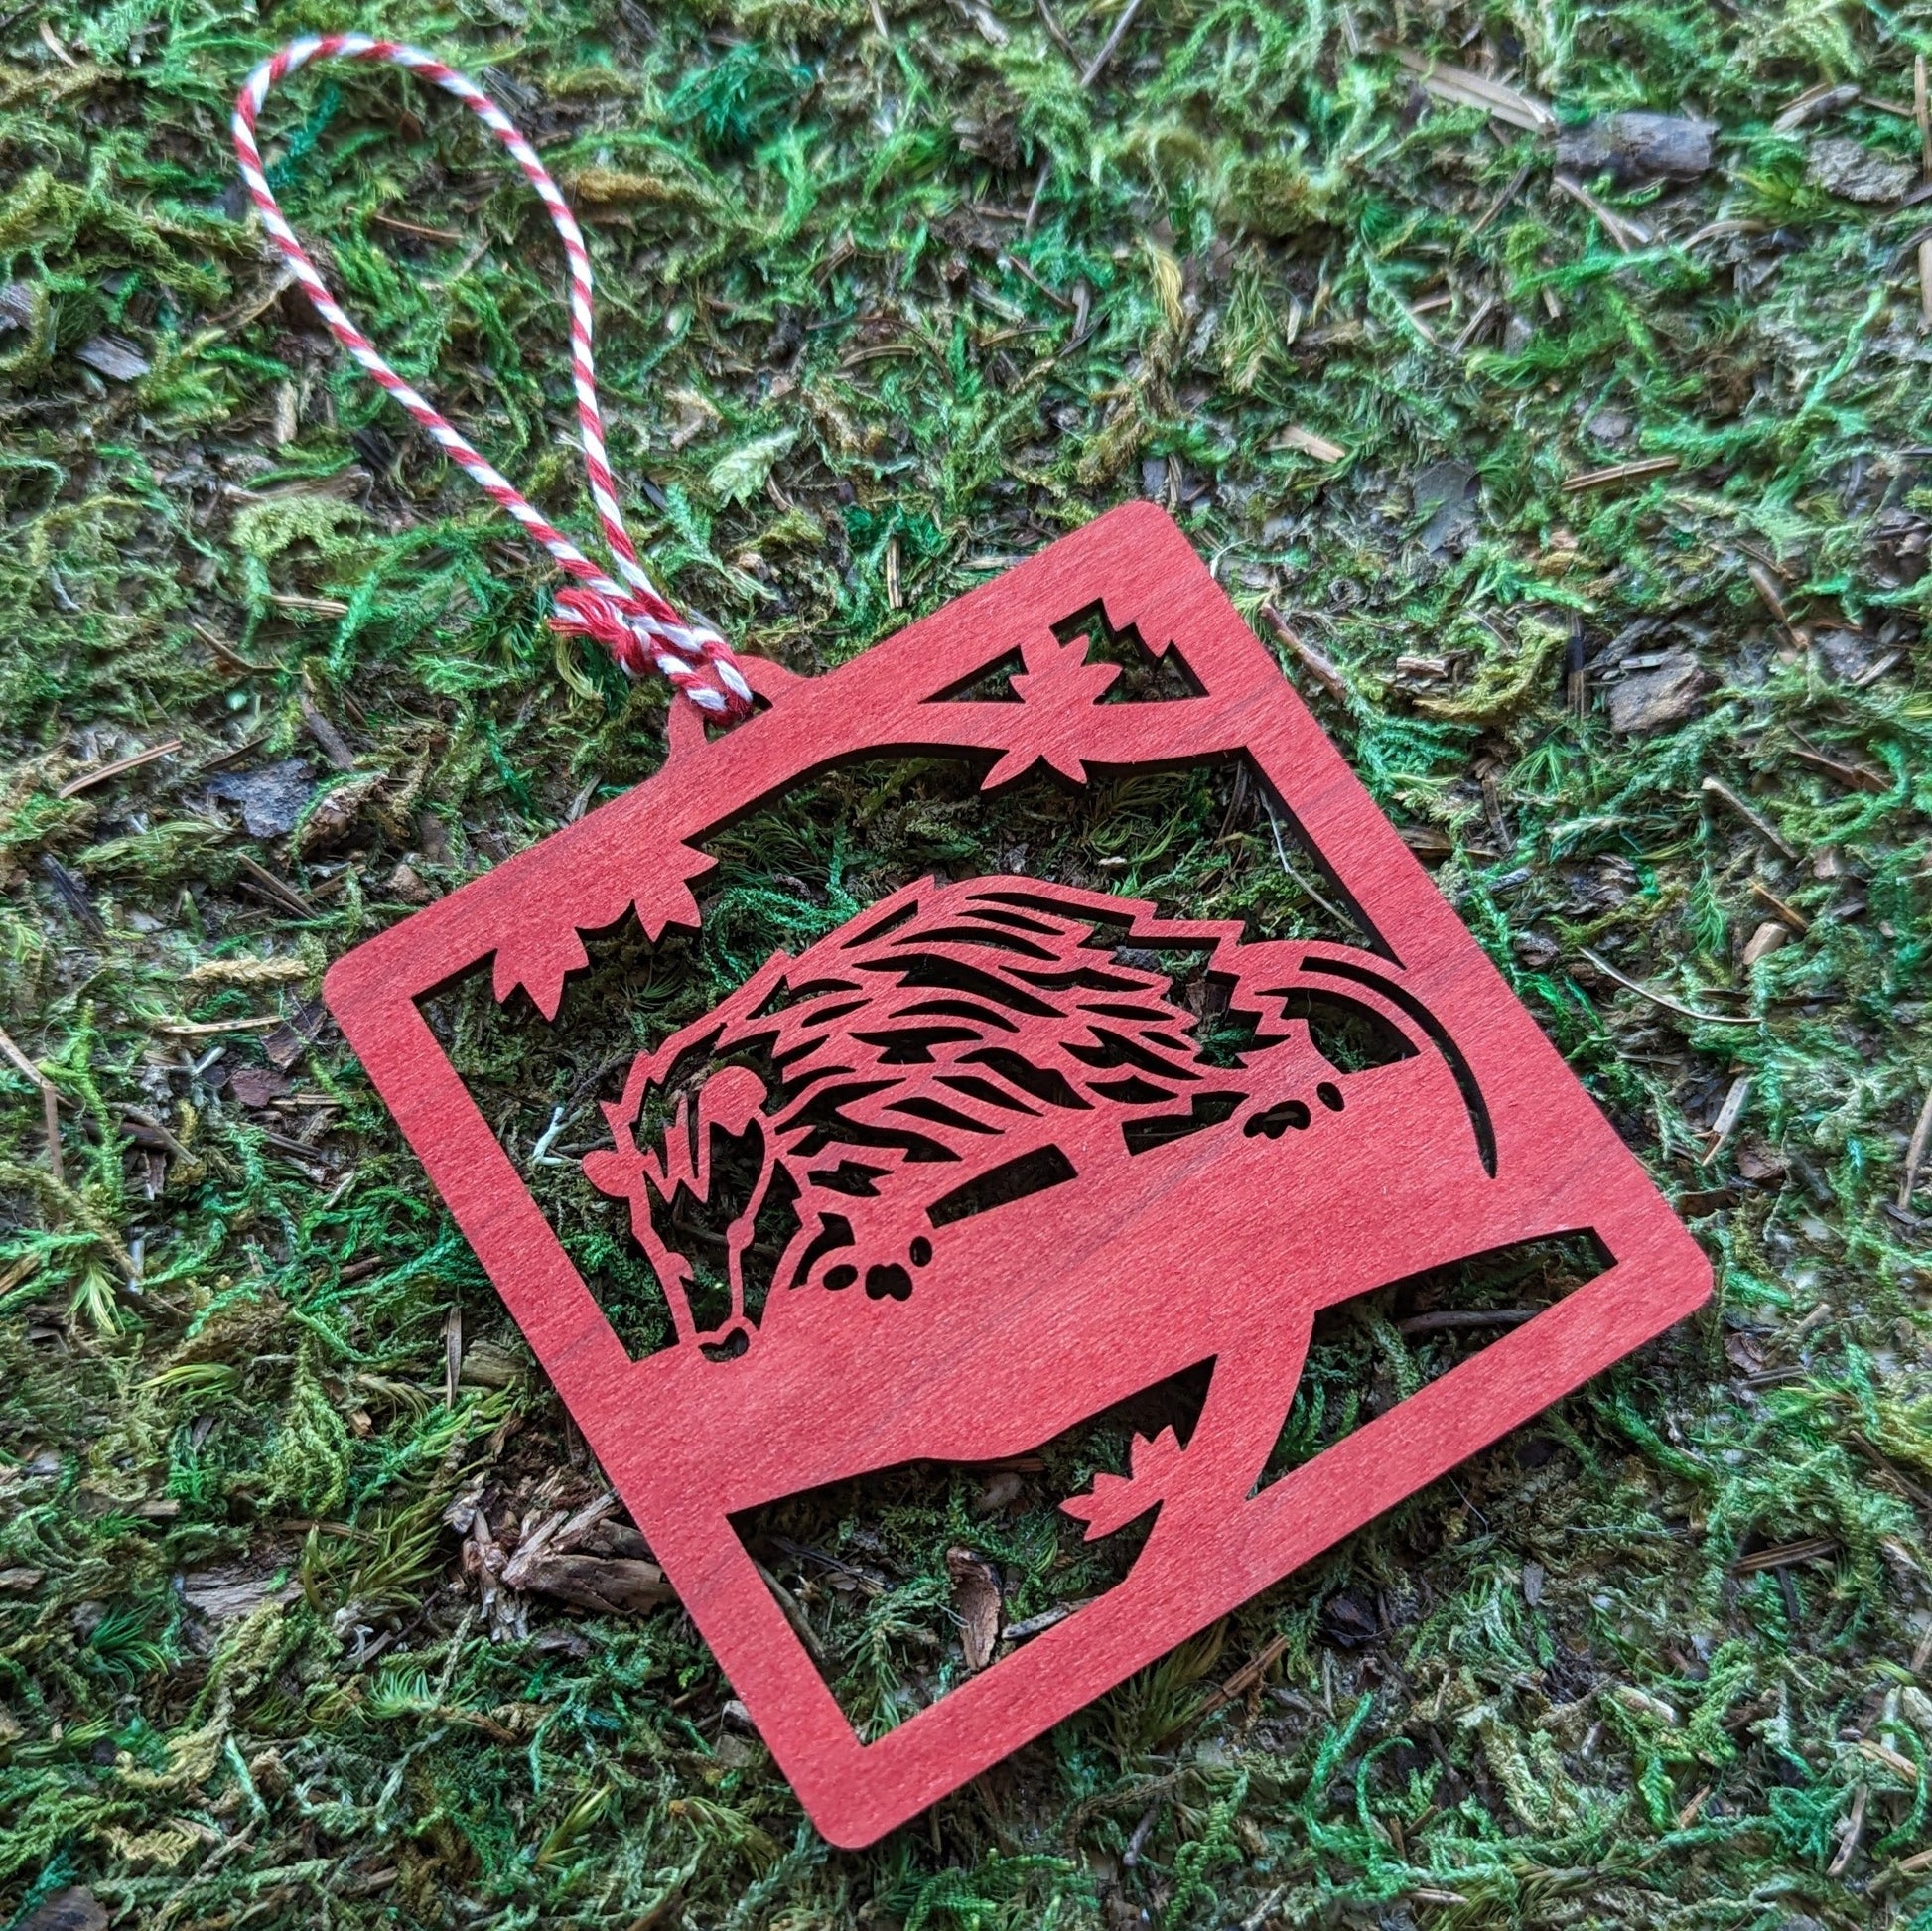 A wooden laser cut ornament of an opossum on a tree branch colored with red wood dye on a mossy background.